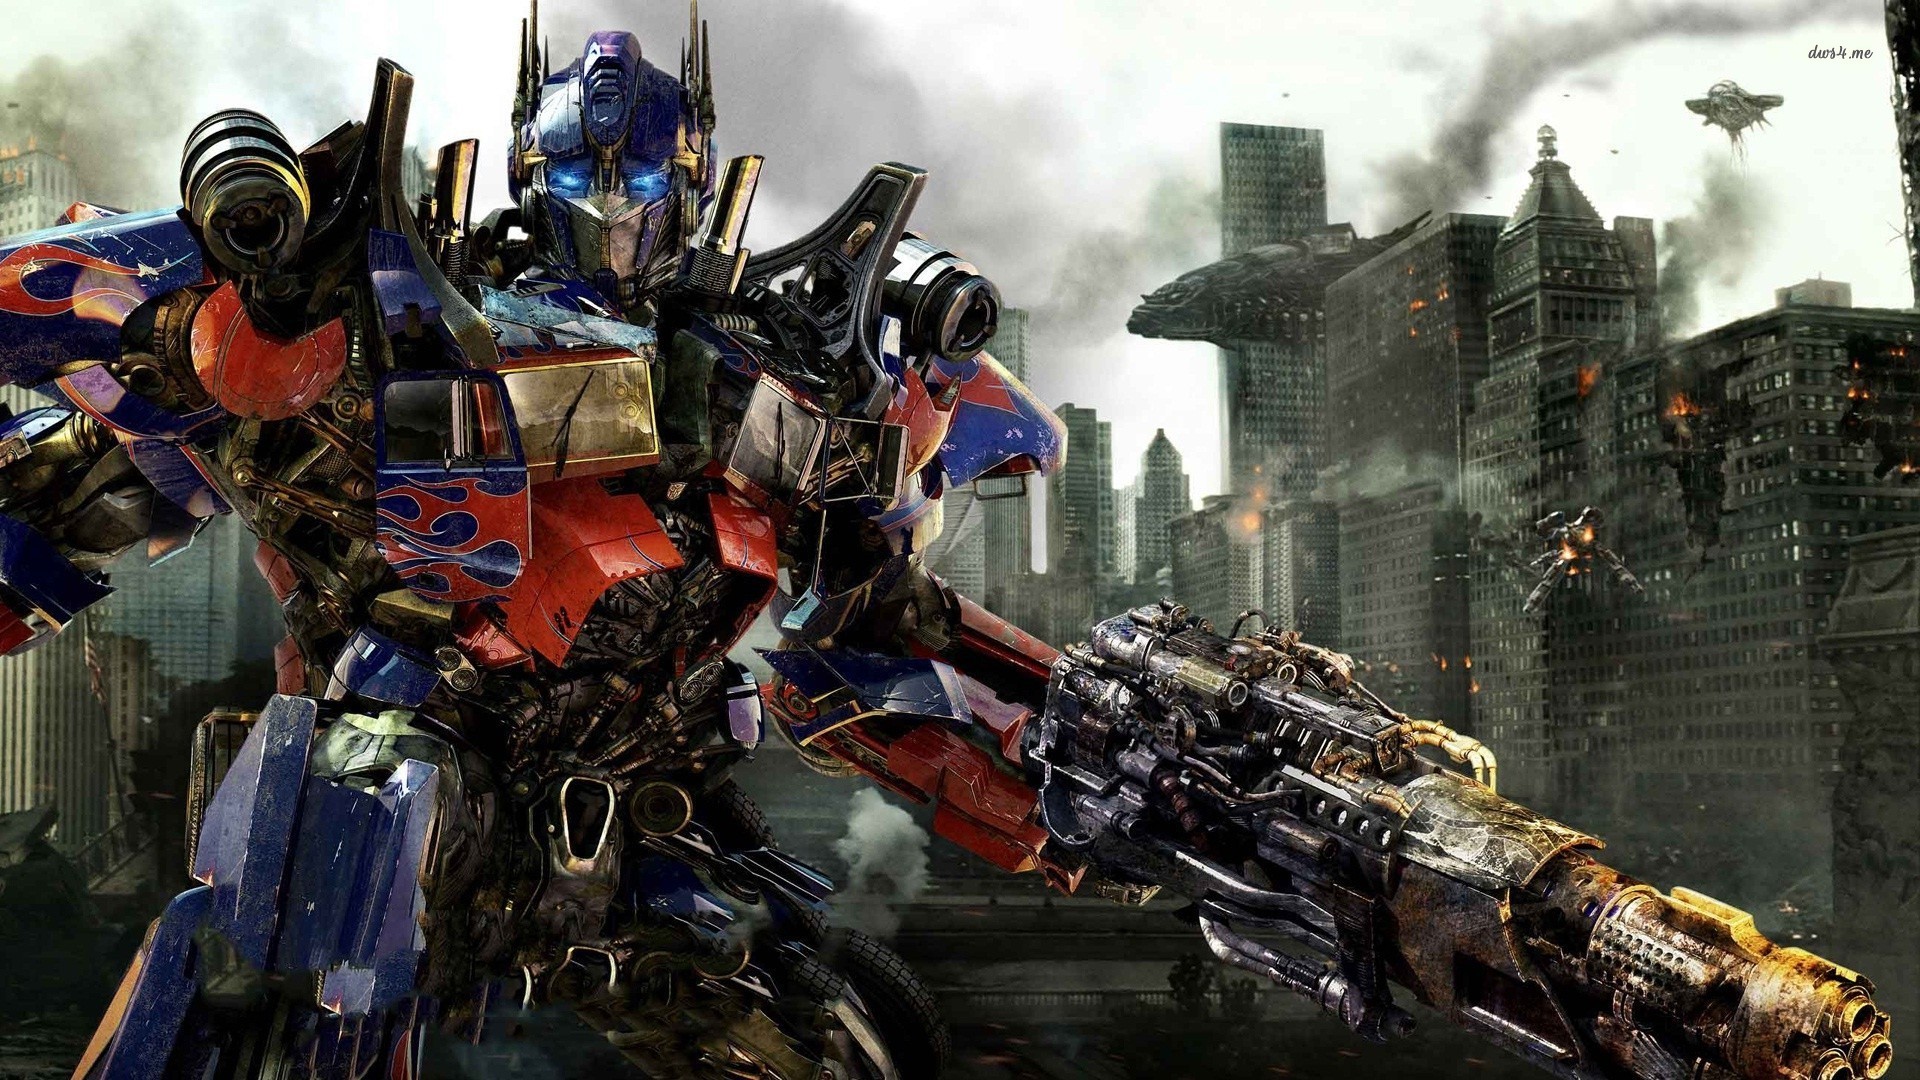 1920x1080 Free Transformers Wallpapers Wallpaper Cave Â· HD Transformers Wallpapers  amp Backgrounds For Free Download ...